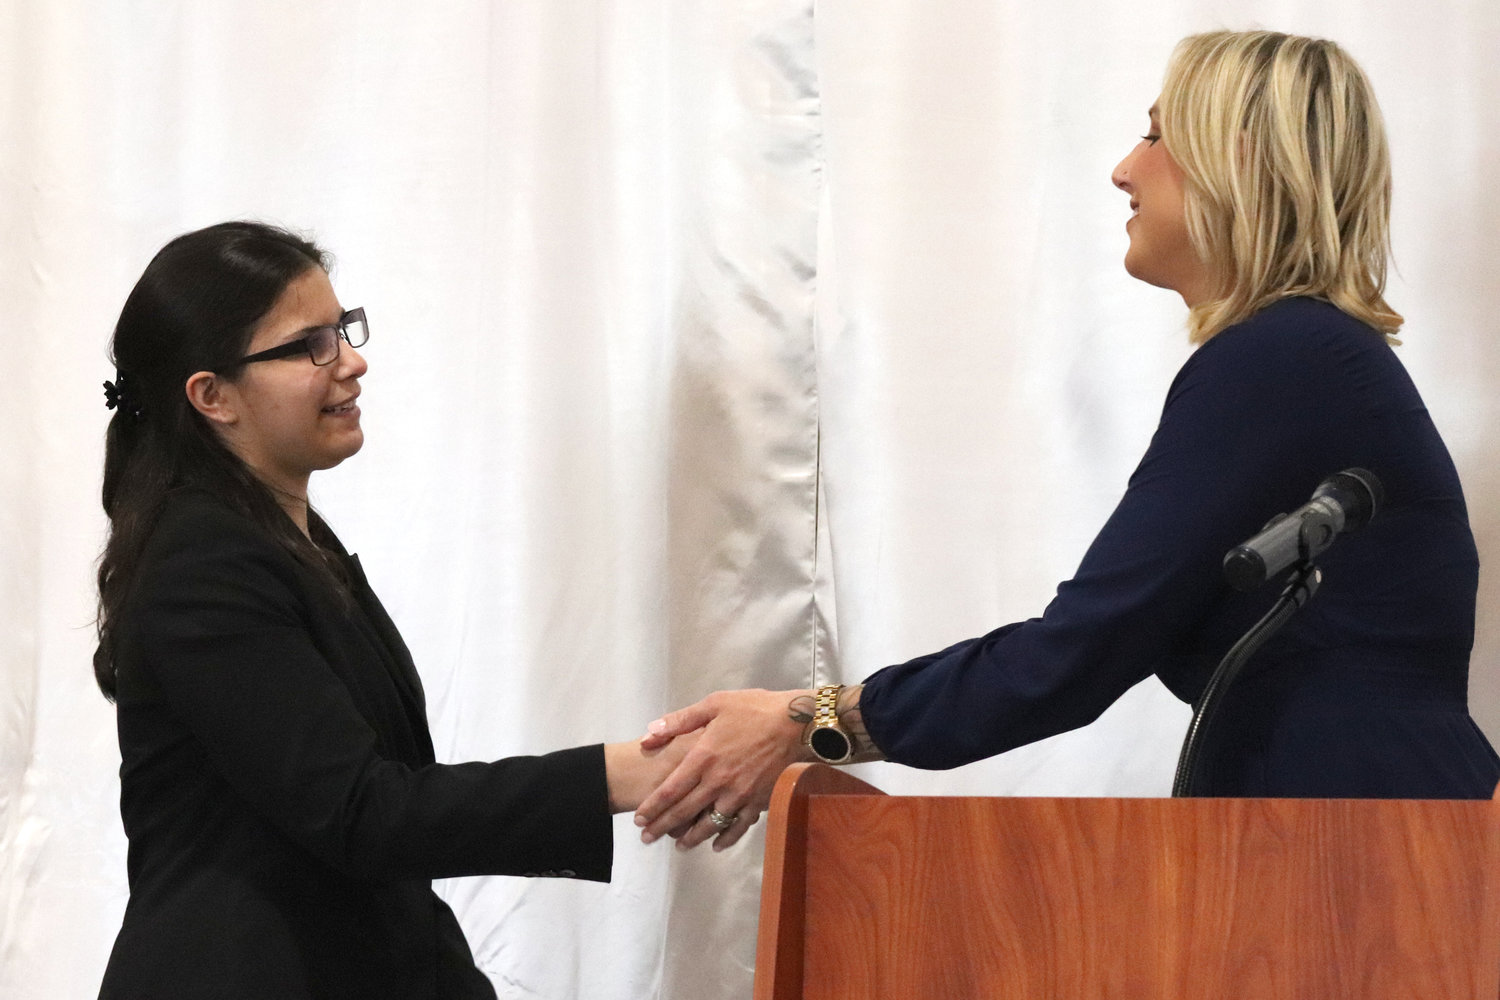 Centralia senior Annarazelle Garcia accepts a scholarship from Visiting Nurses during the Rob Fuller Top 25 Scholarship Luncheon in Chehalis on Monday.